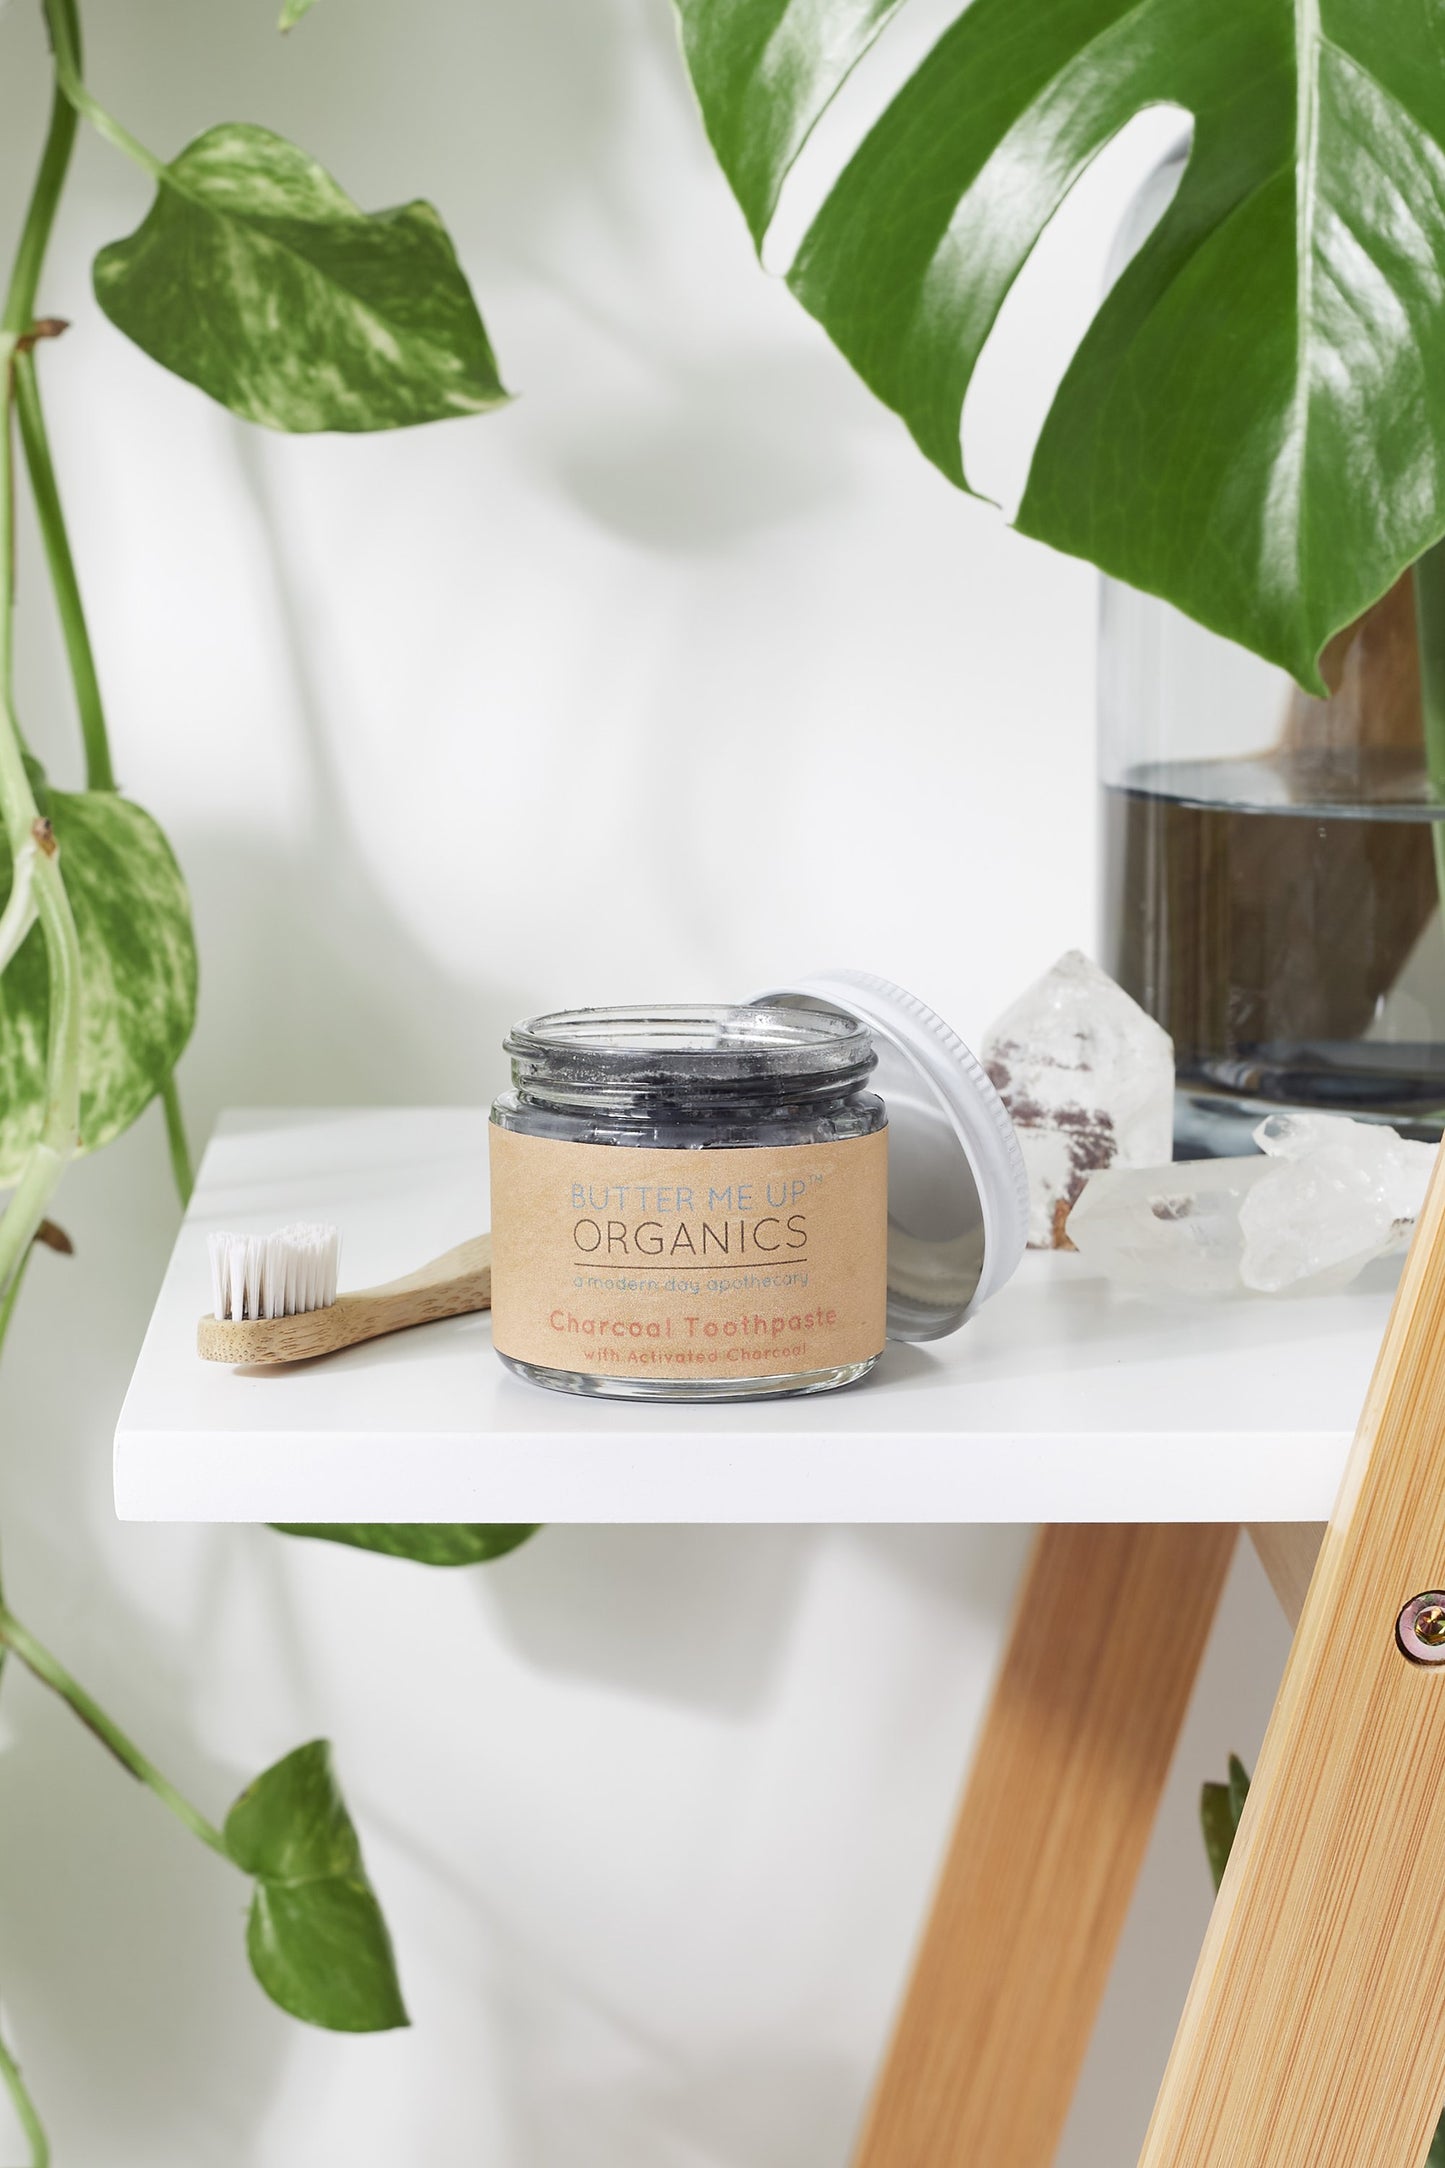 Organic Activated Charcoal Toothpaste / Whitening Toothpaste / Organic